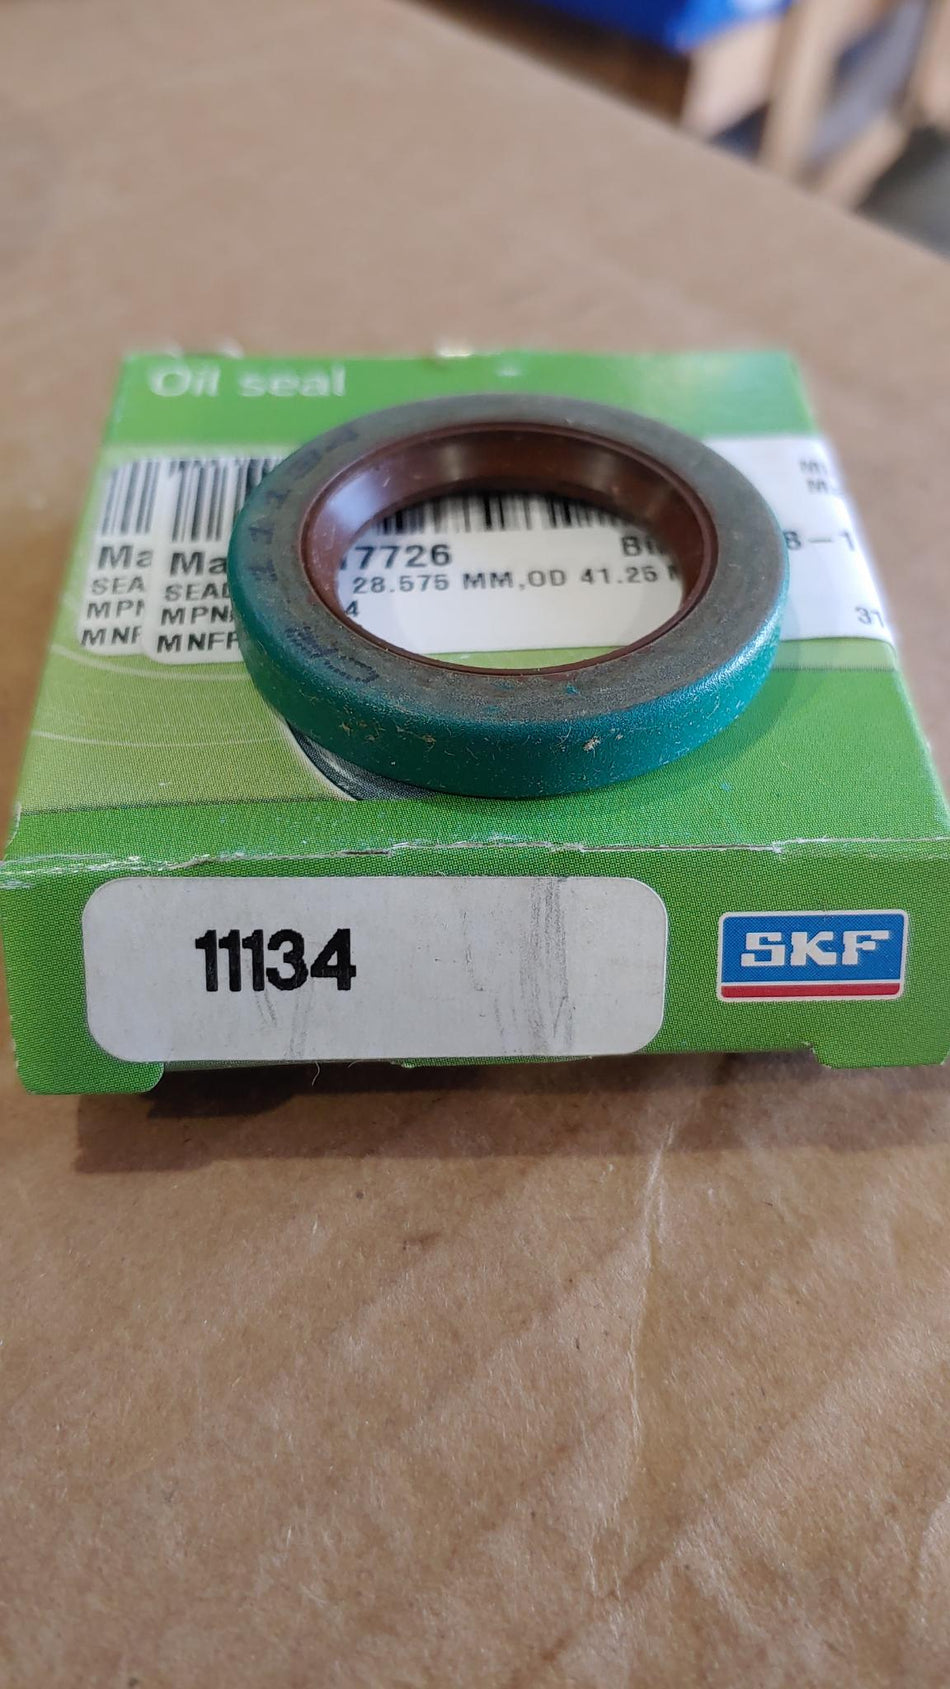 11134 SKF 11134 Radial shaft seal with metal case, SKF Wave lip and auxiliary, contacting lip, for oil or grease